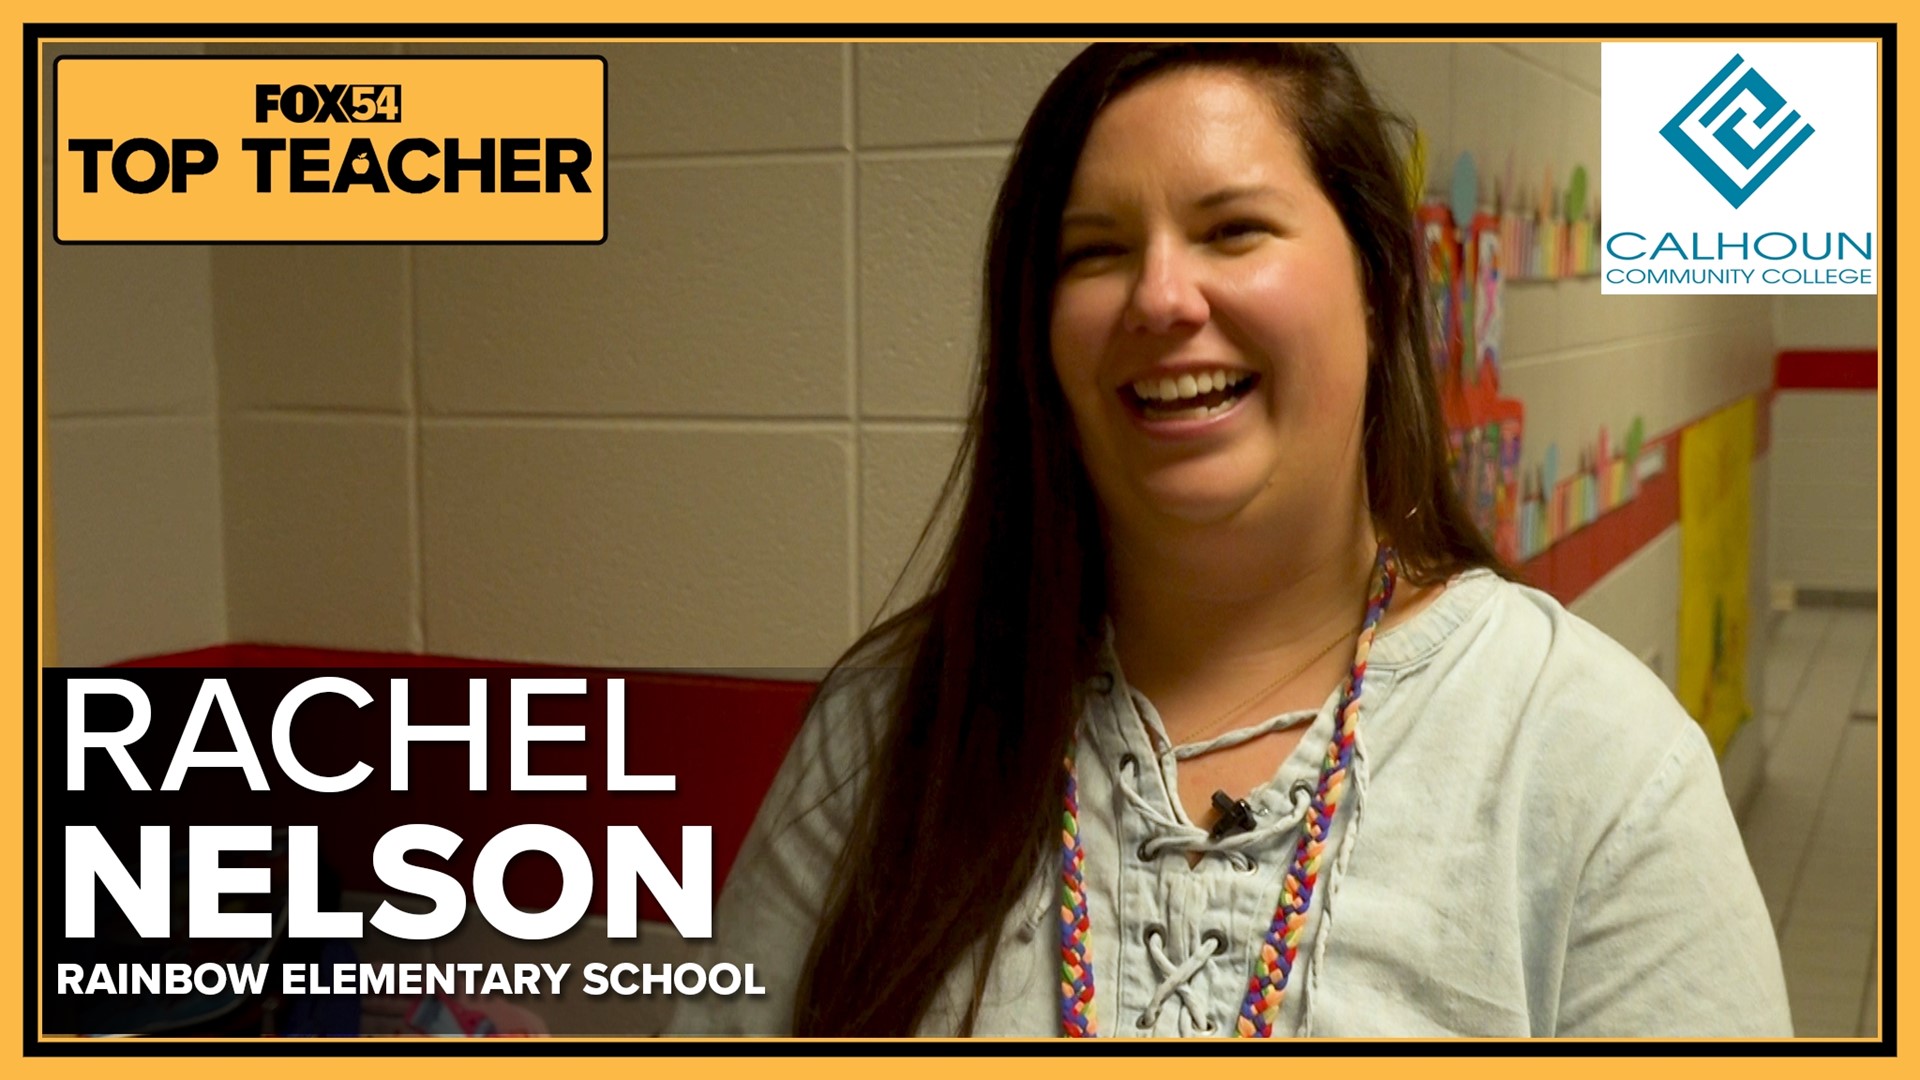 Coming from Rainbow Elementary School this weeks top teacher shared why she loves teaching